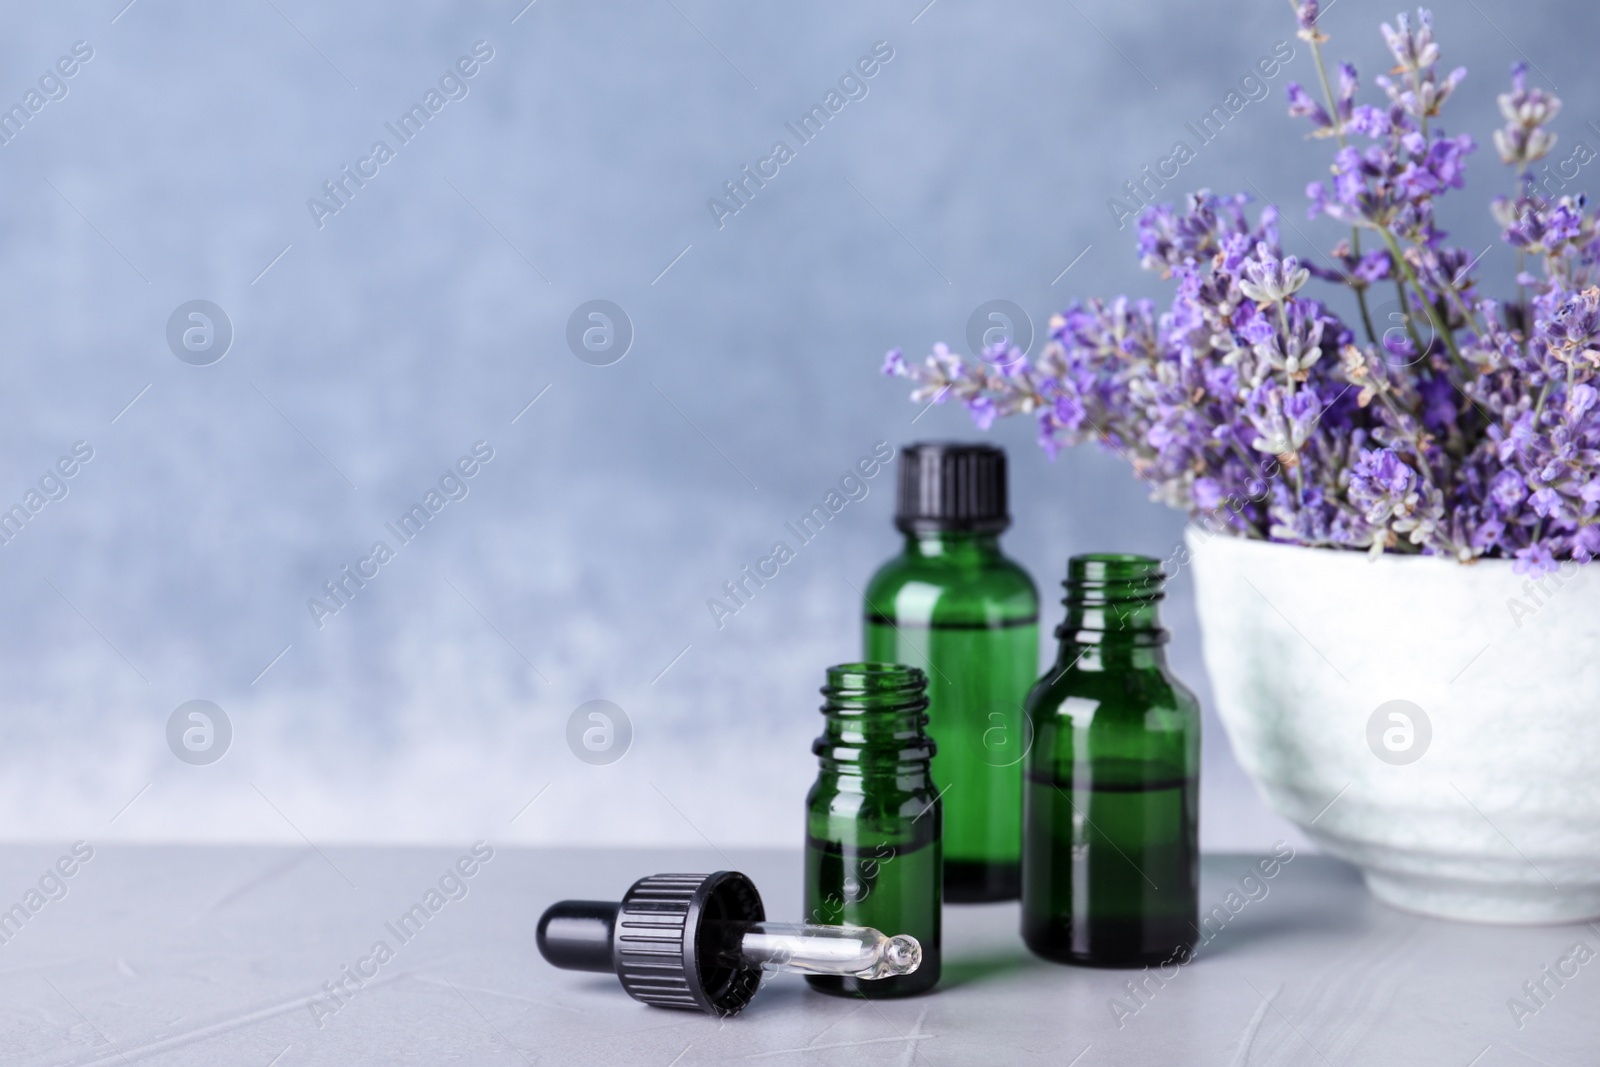 Photo of Bottles of essential oil and bowl with lavender flowers on stone table against blue background. Space for text